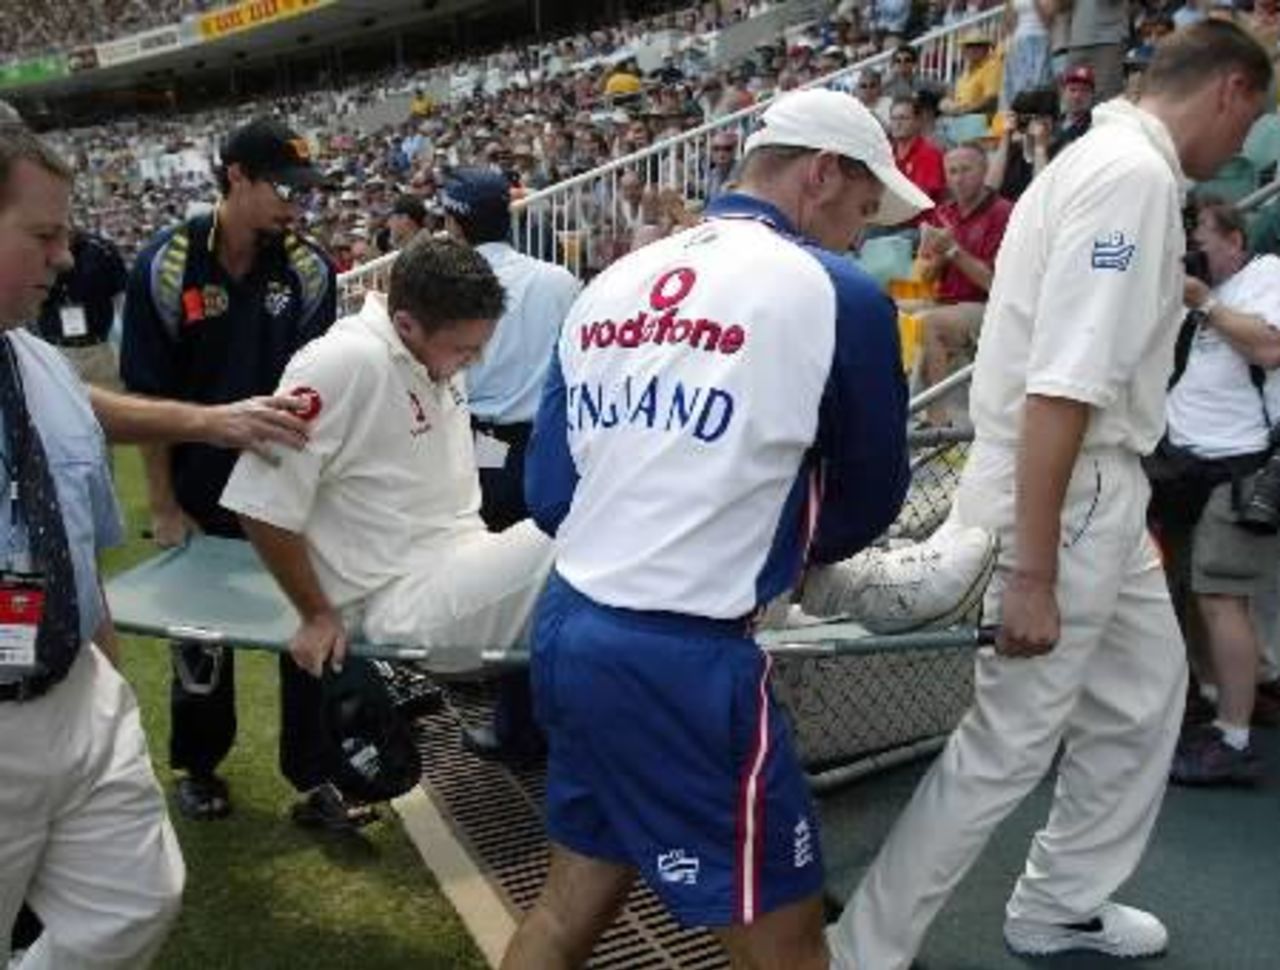 Australia paceman Jason Gillespie (2nd L) helps carry Simon Jones off the field after the England fast bowler injured his knee fielding on the opening day of the first Ashes test in Brisbane.